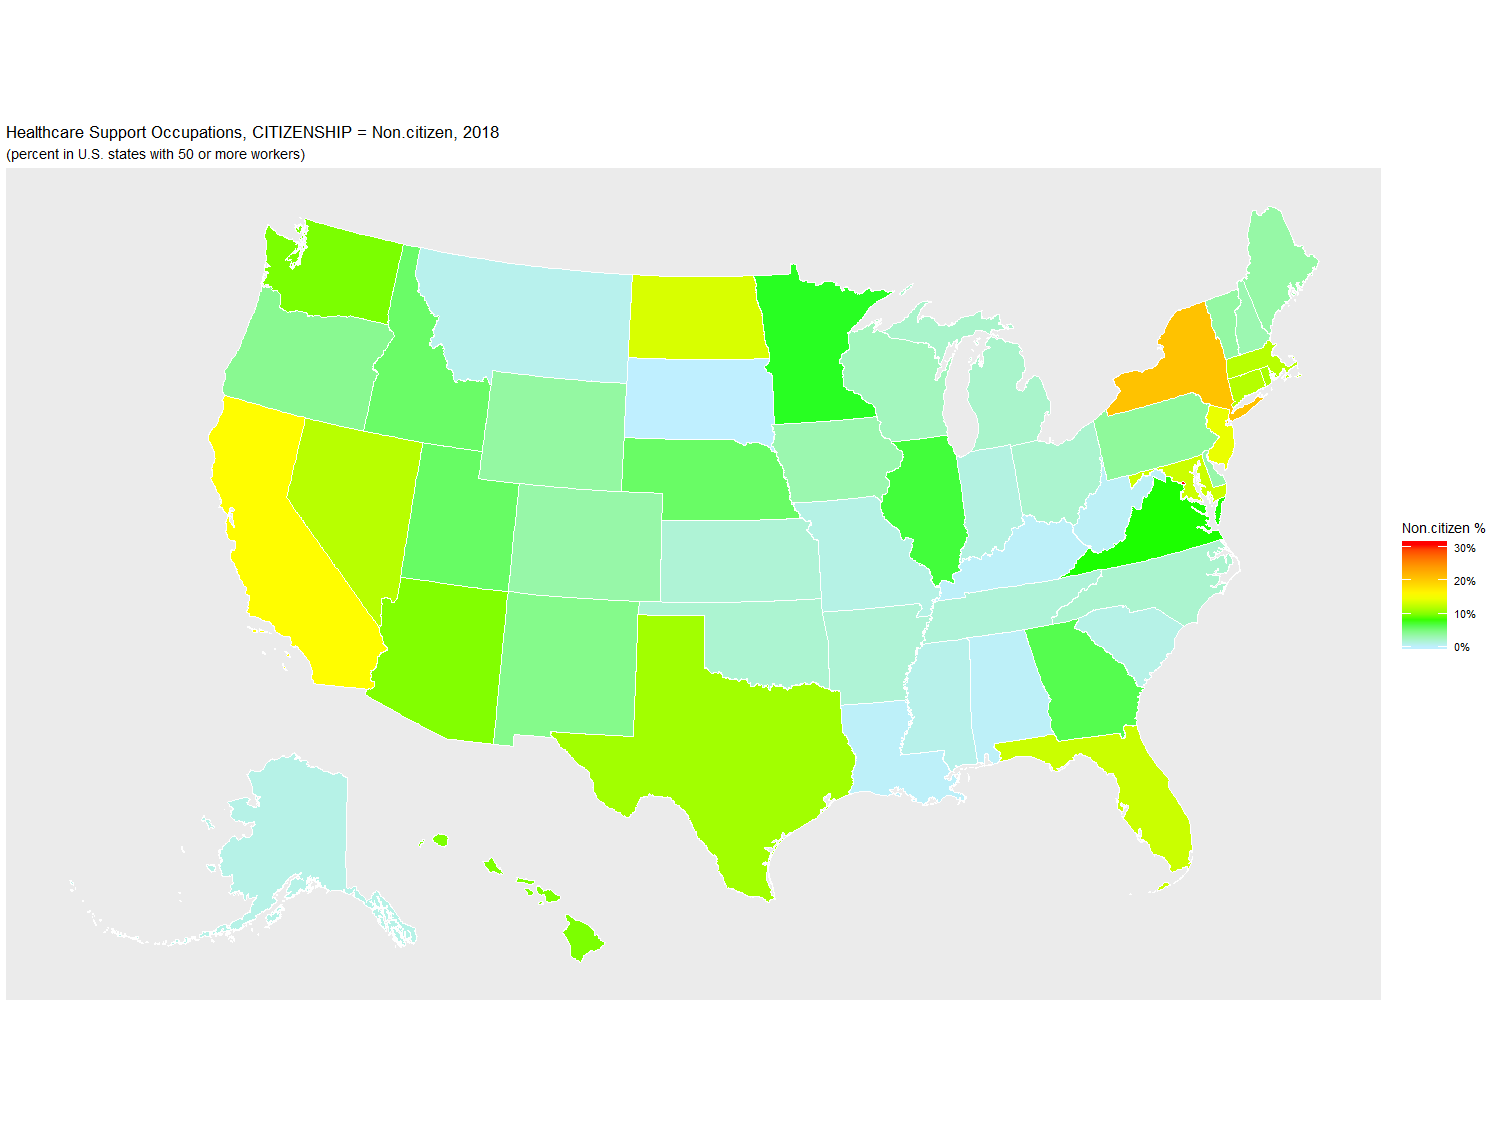 Healthcare Support Occupations by U.S. State, 2018